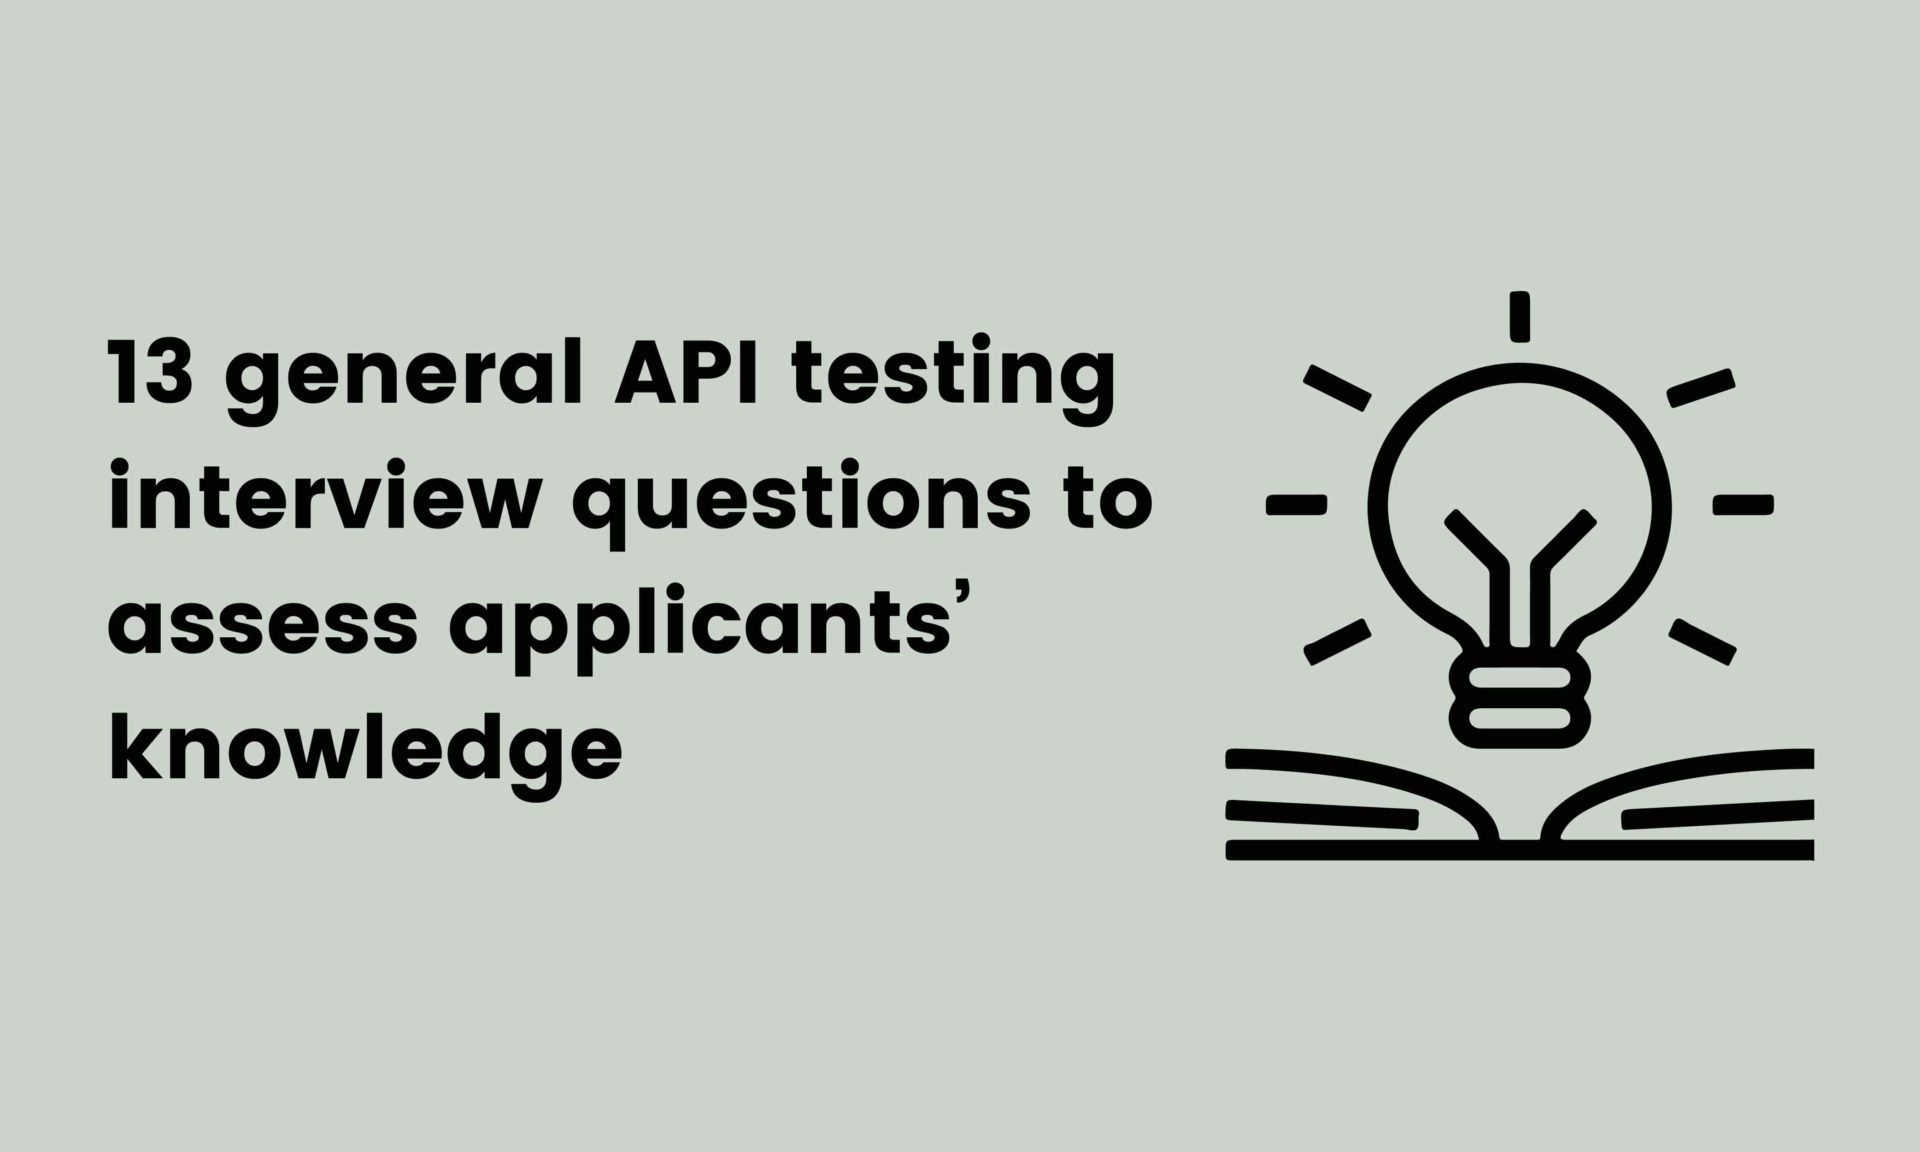 13 general API testing interview questions to assess applicants’ knowledge